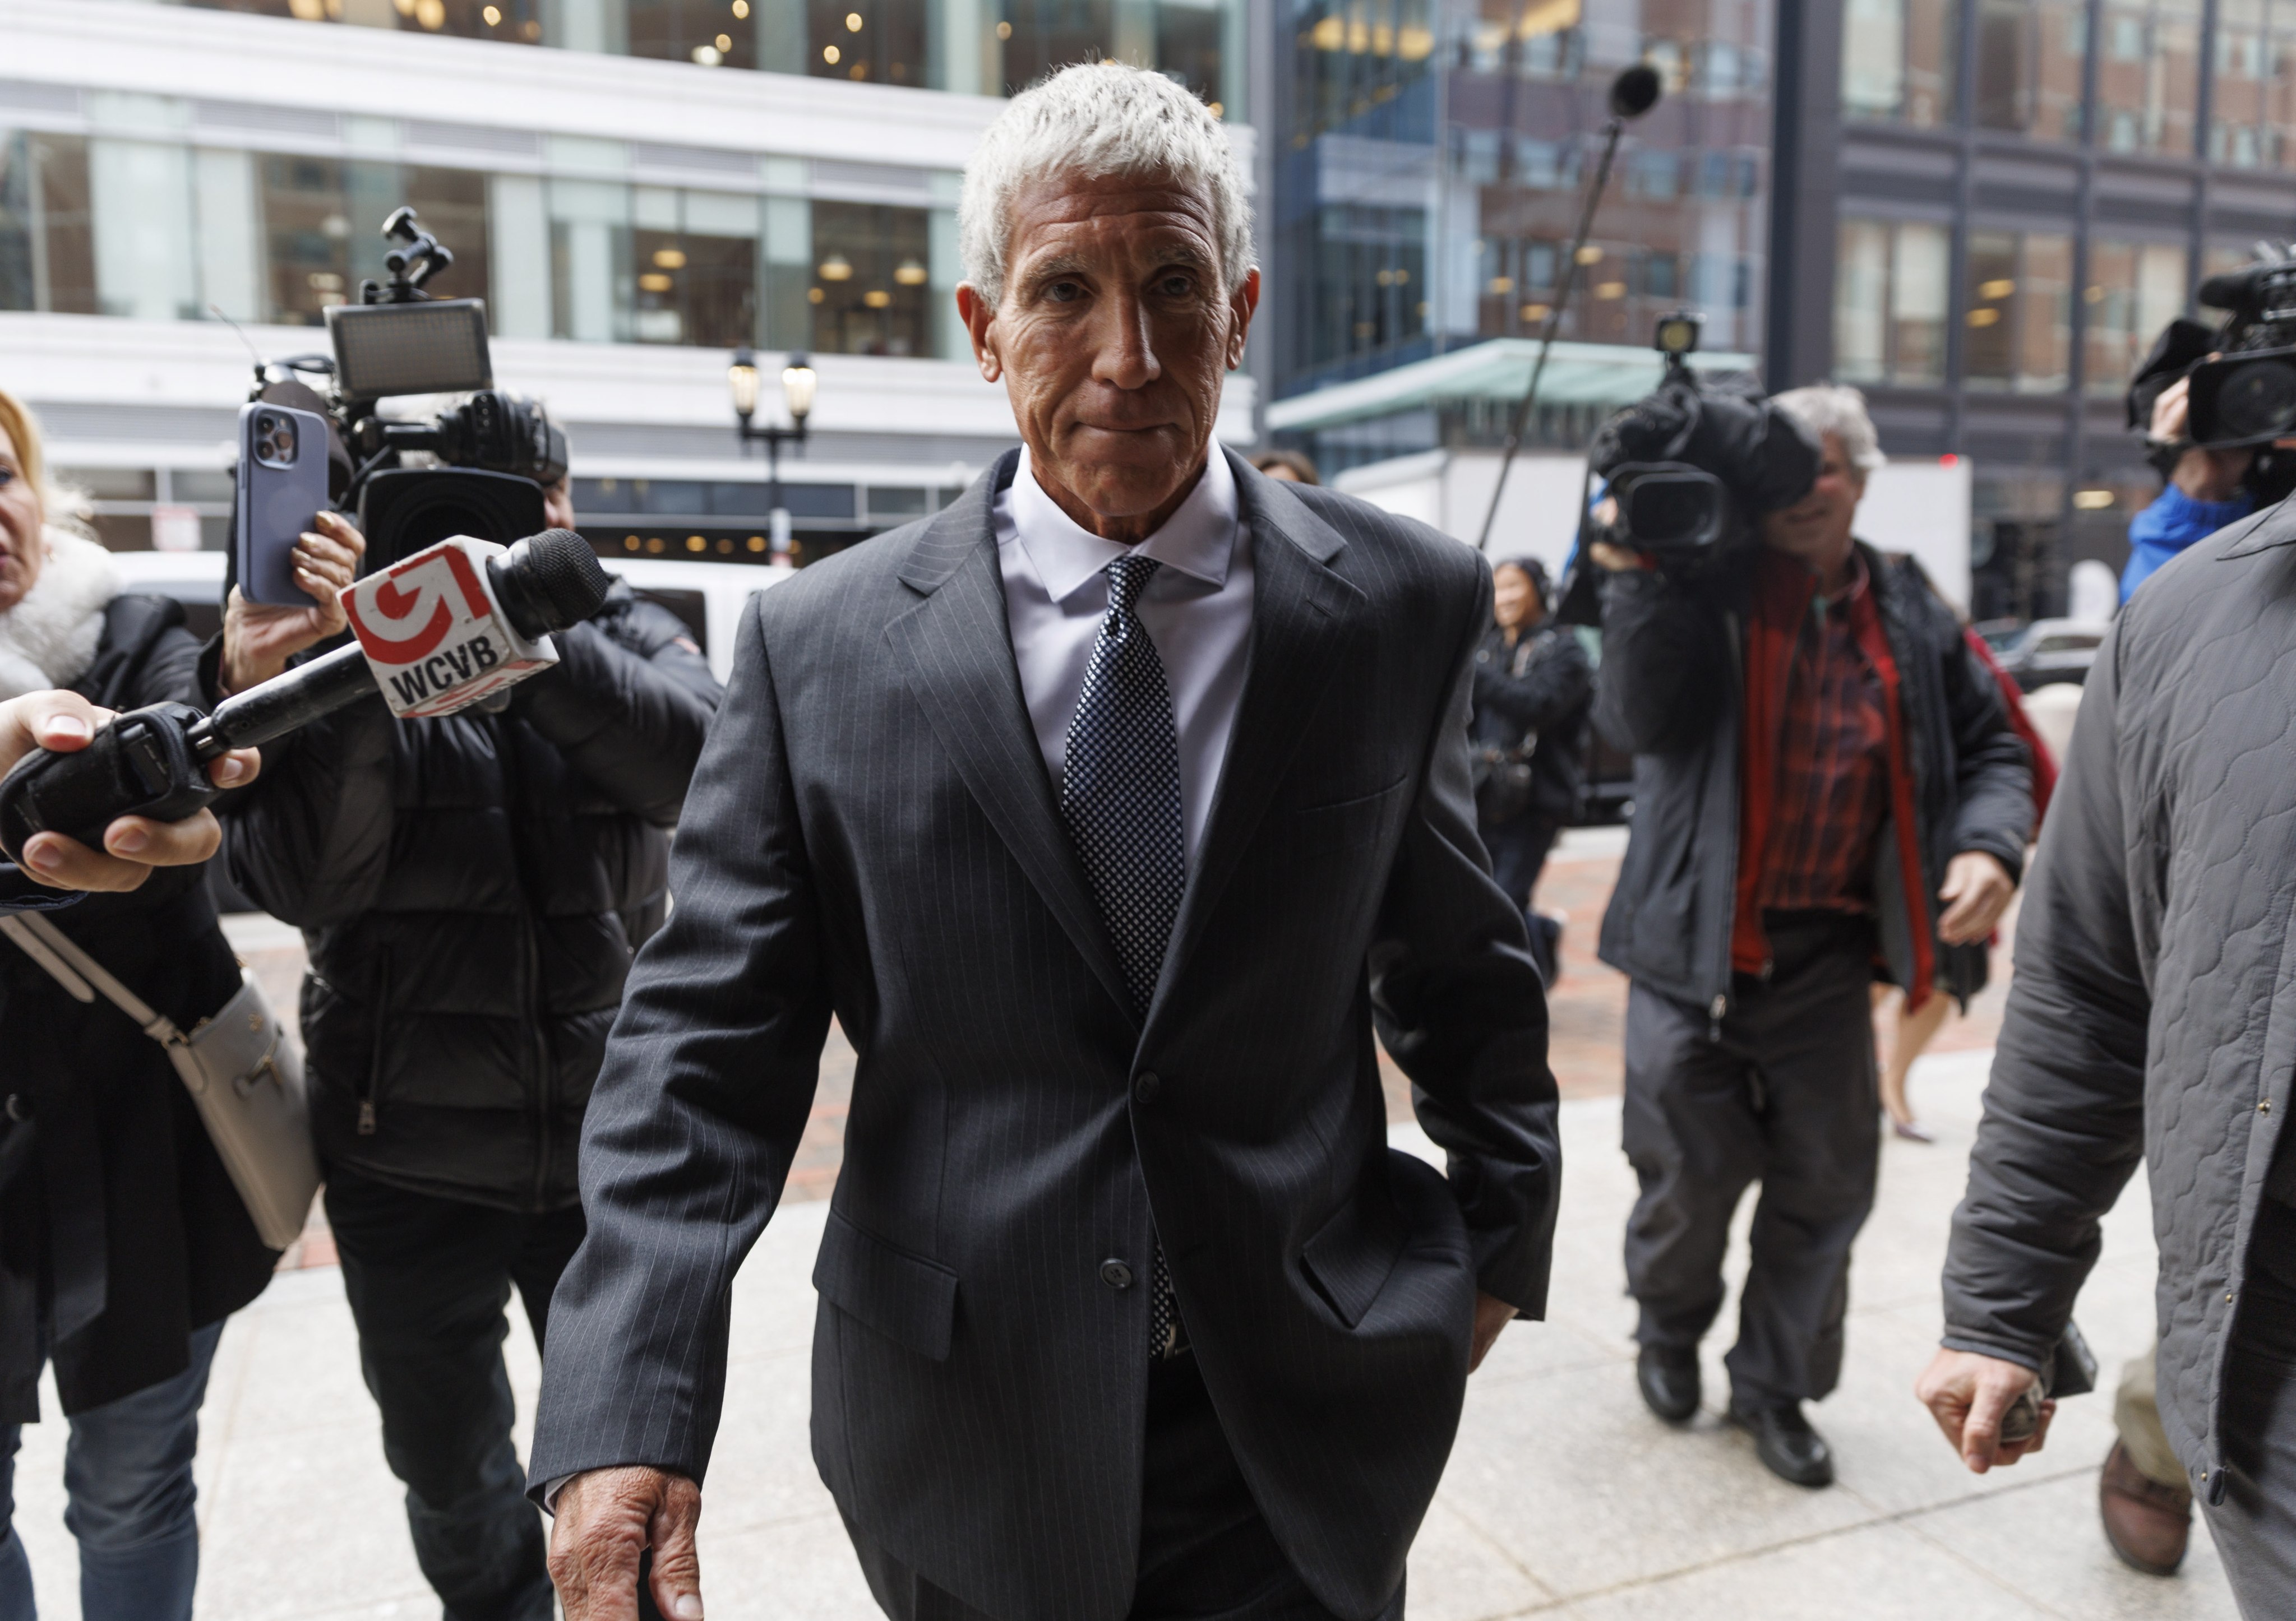 Rick Singer arrives at the courthouse in Boston for his sentencing in the ‘Varsity Blues’ college admissions bribery case on Wednesday. Photo: EPA-EFE